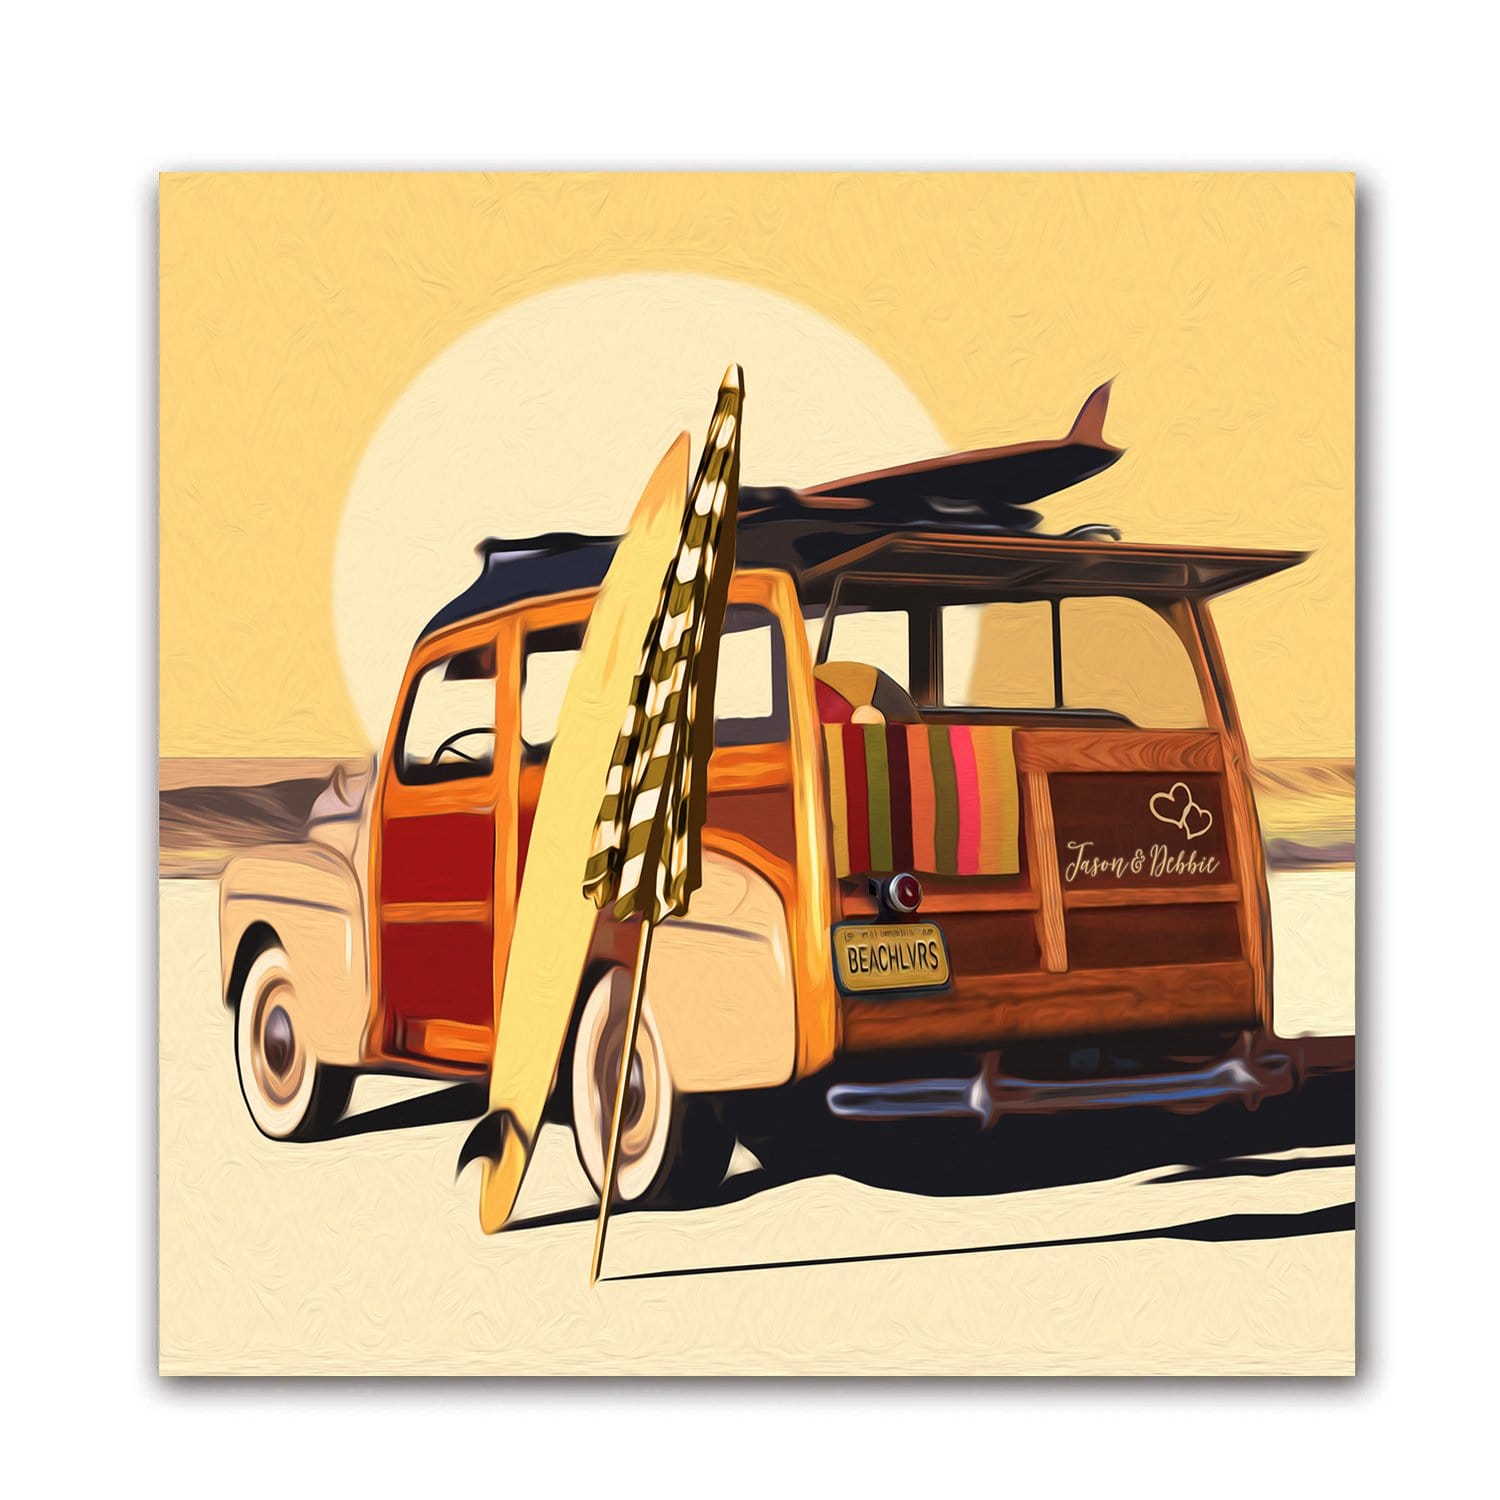 Surfer Woody Wagon Art Print with personalized names in the art